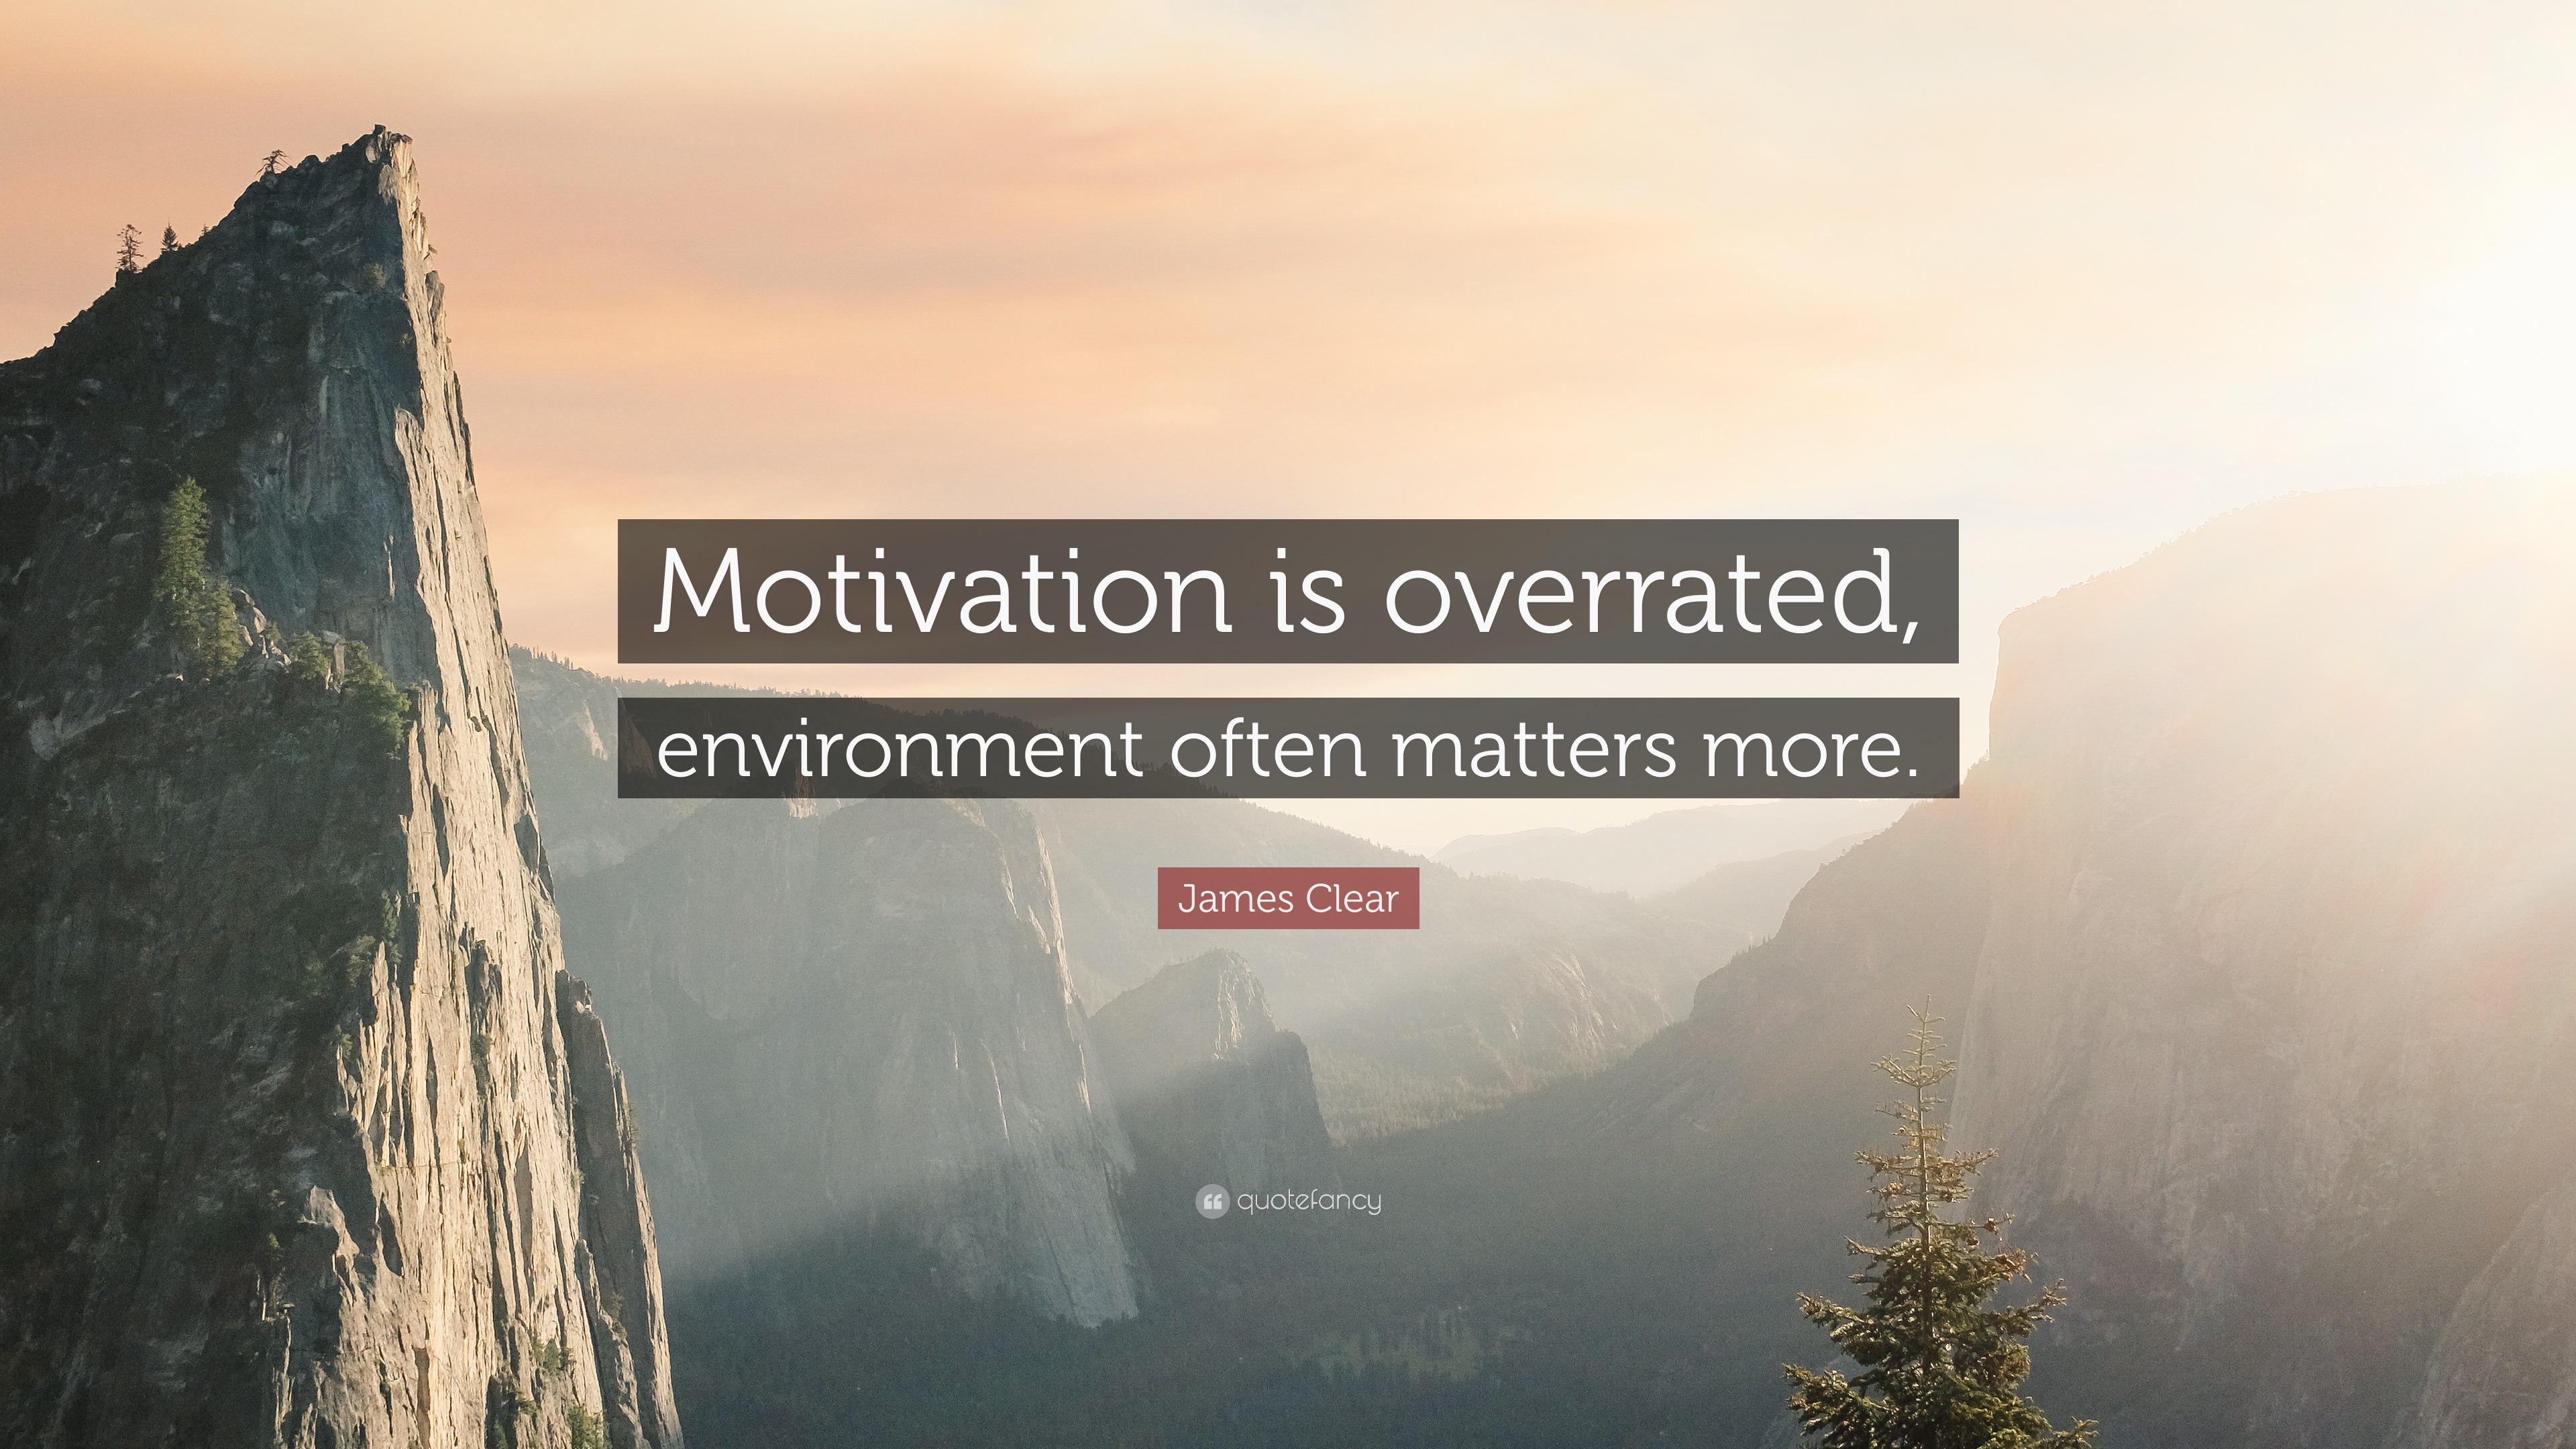 James Clear Quote: “Motivation is overrated, environment often matters